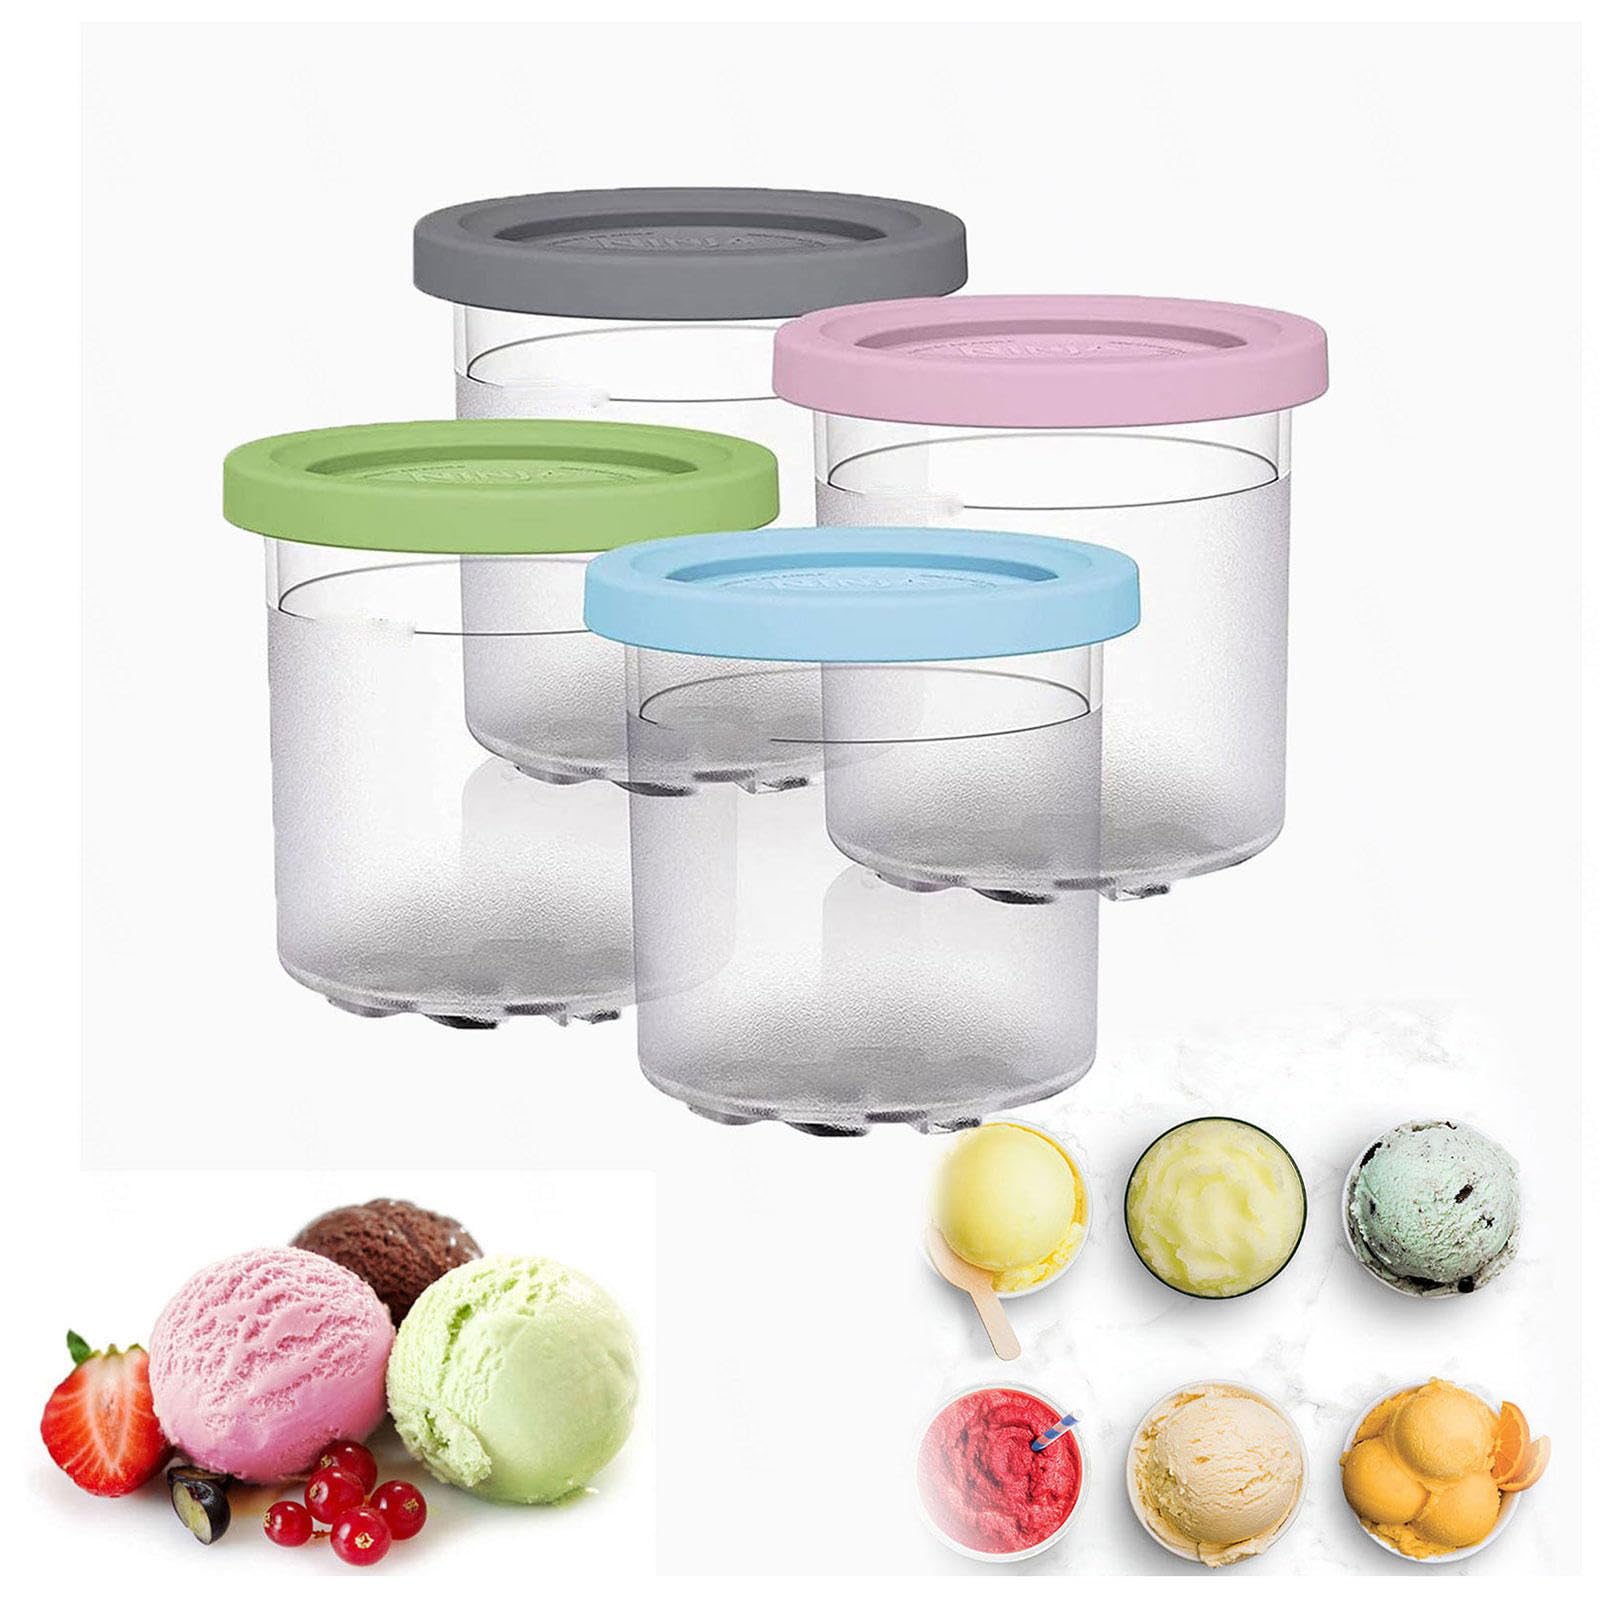 REMYS Creami Deluxe Pints, for Ninja Kitchen Creami,16 OZ Creami Deluxe Pints Airtight and Leaf-Proof Compatible NC301 NC300 NC299AMZ Series Ice Cream Maker